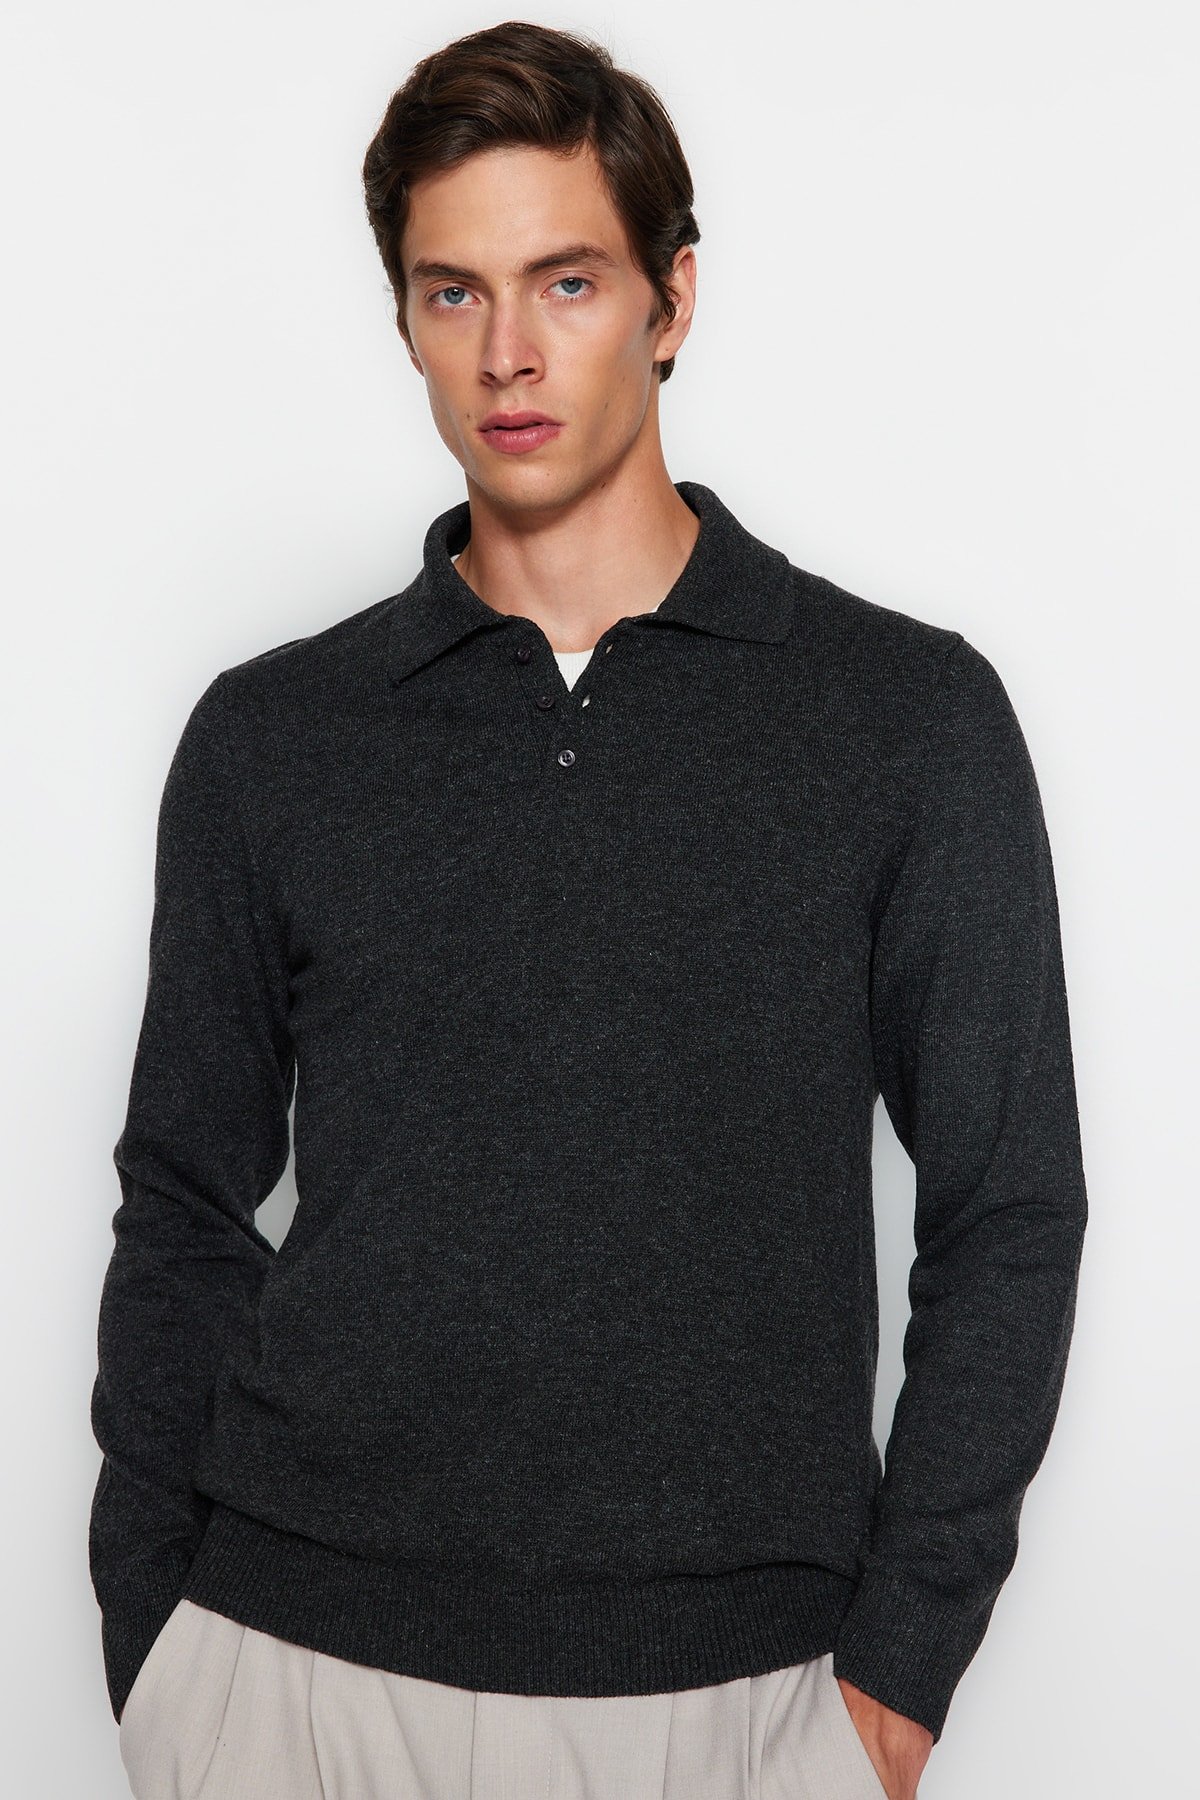 Trendyol Anthracite Slim Fit Polo Neck Buttoned Smart Knitwear Sweater